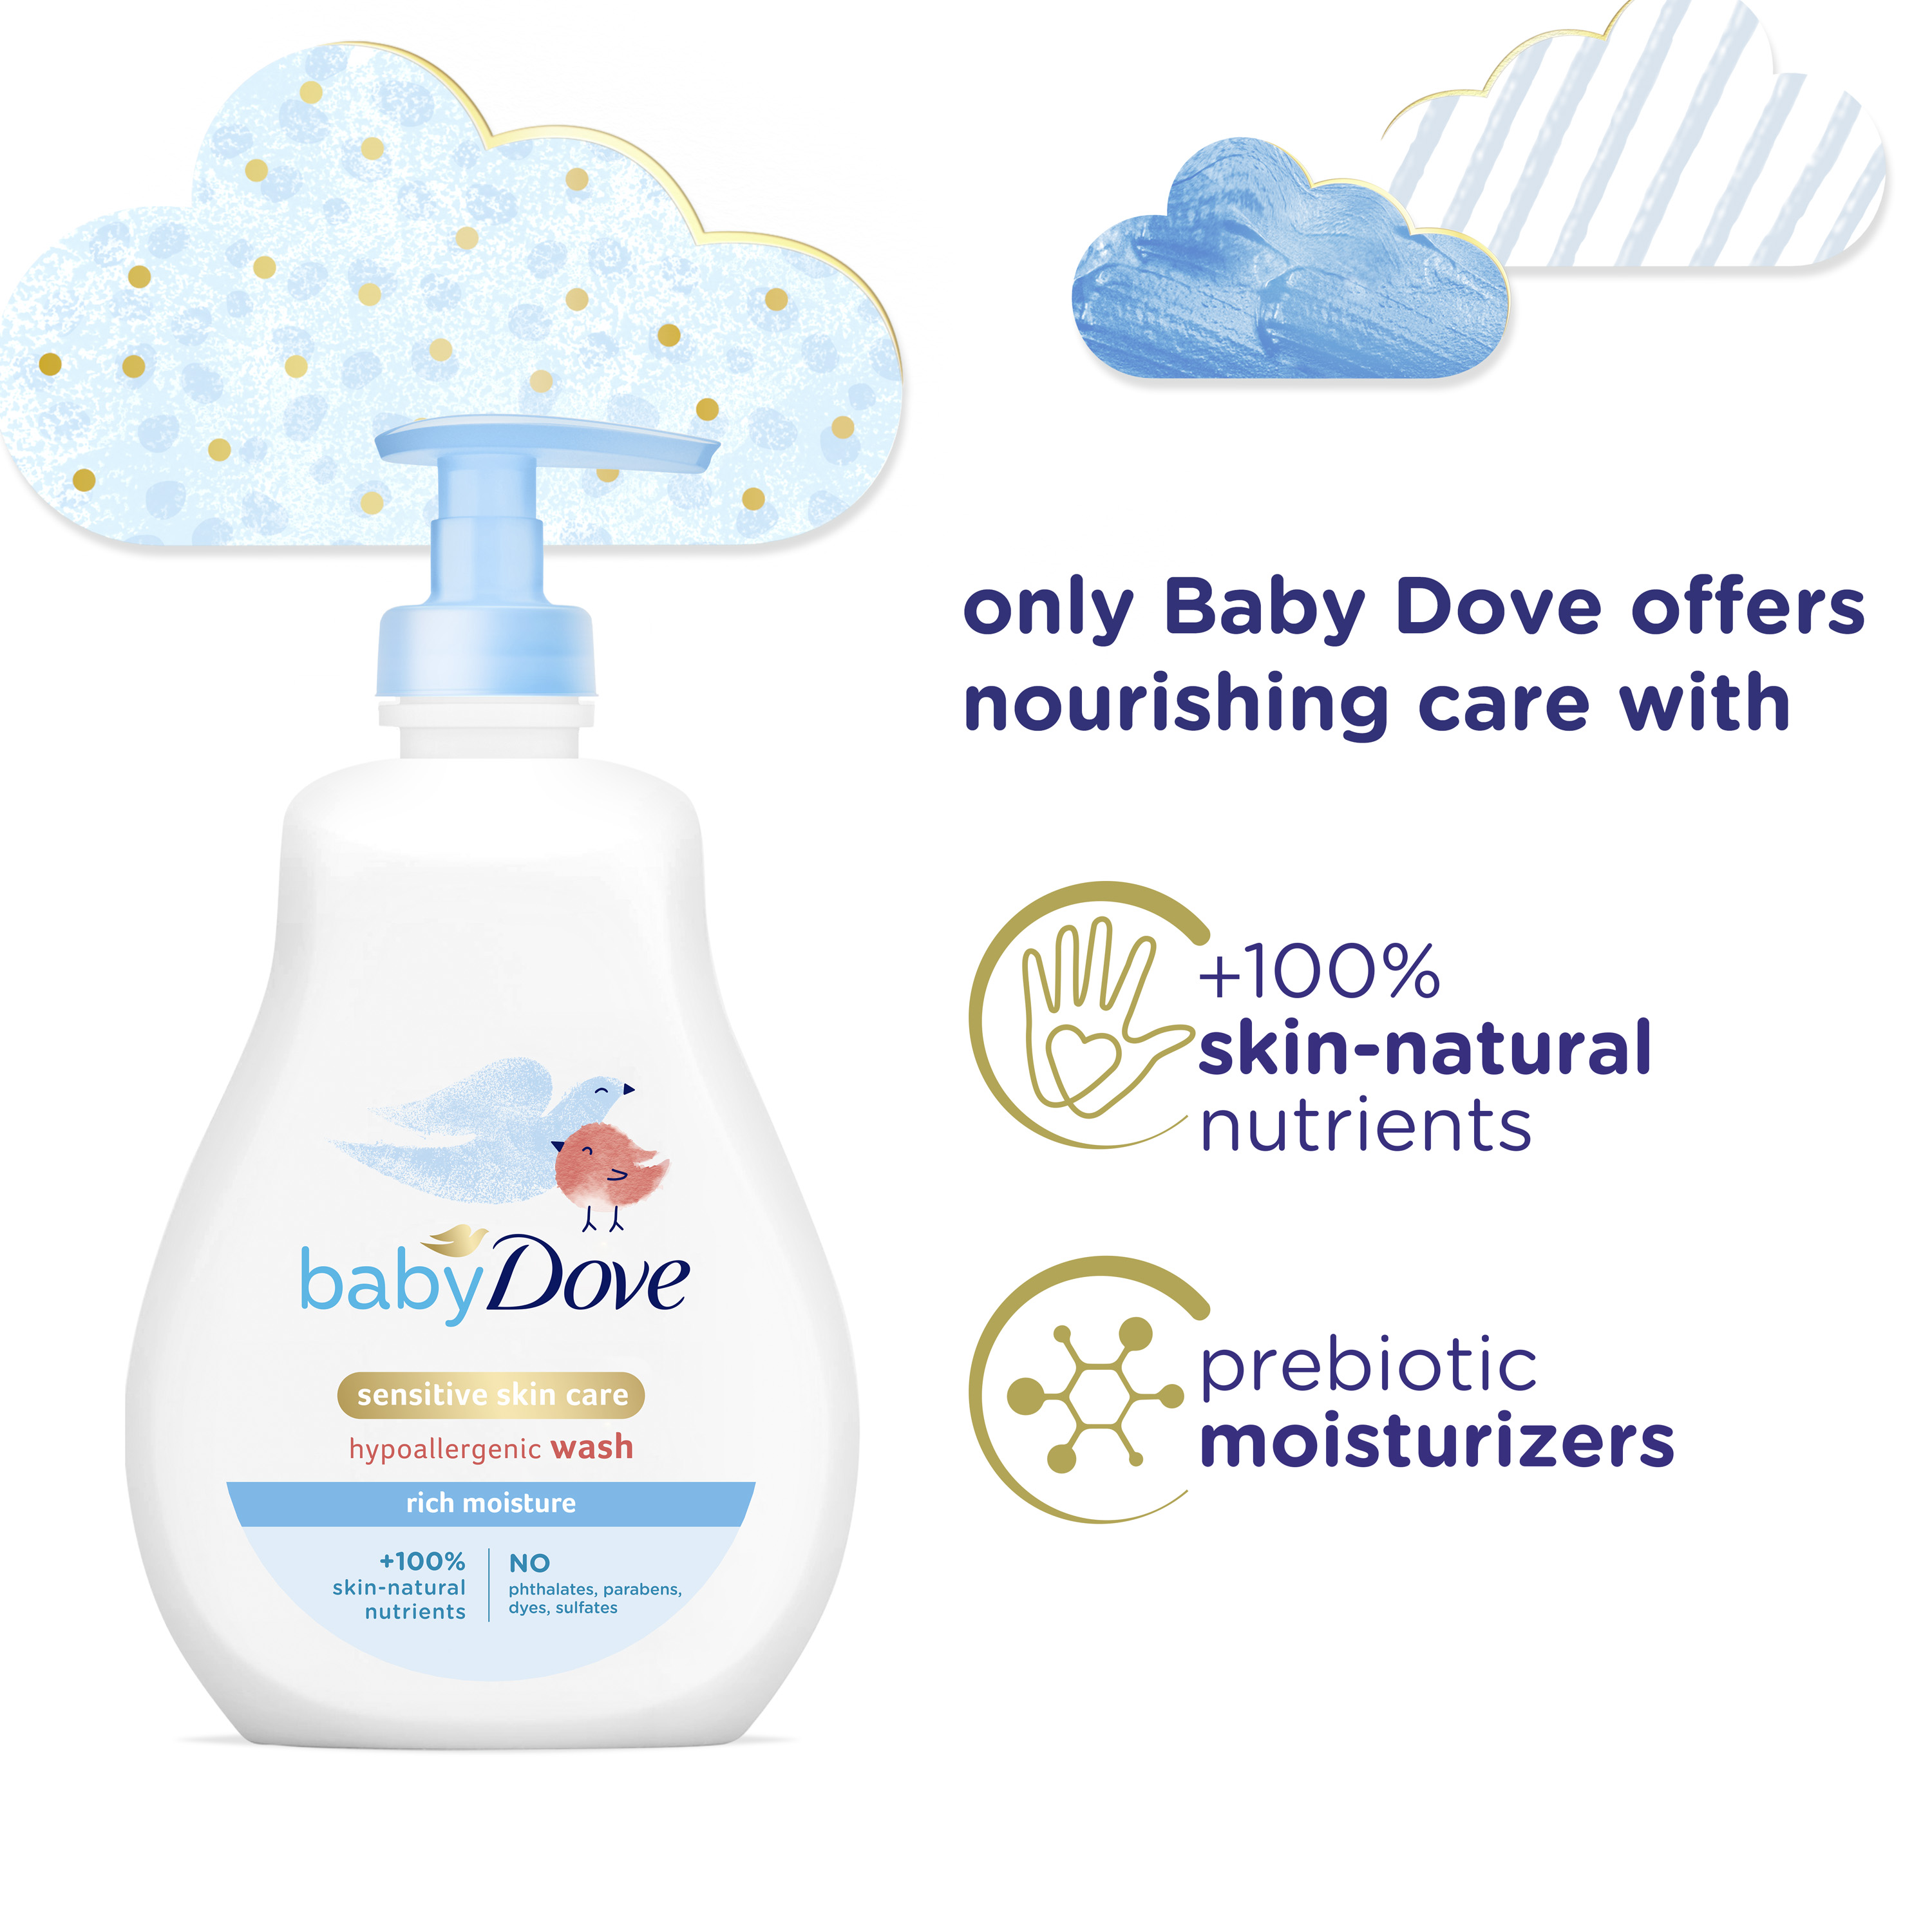 Baby Dove Sensitive Skin Care Liquid Baby Body Wash Rich Moisture, Hypoallergenic and Tear-Free, 13 oz - image 10 of 13